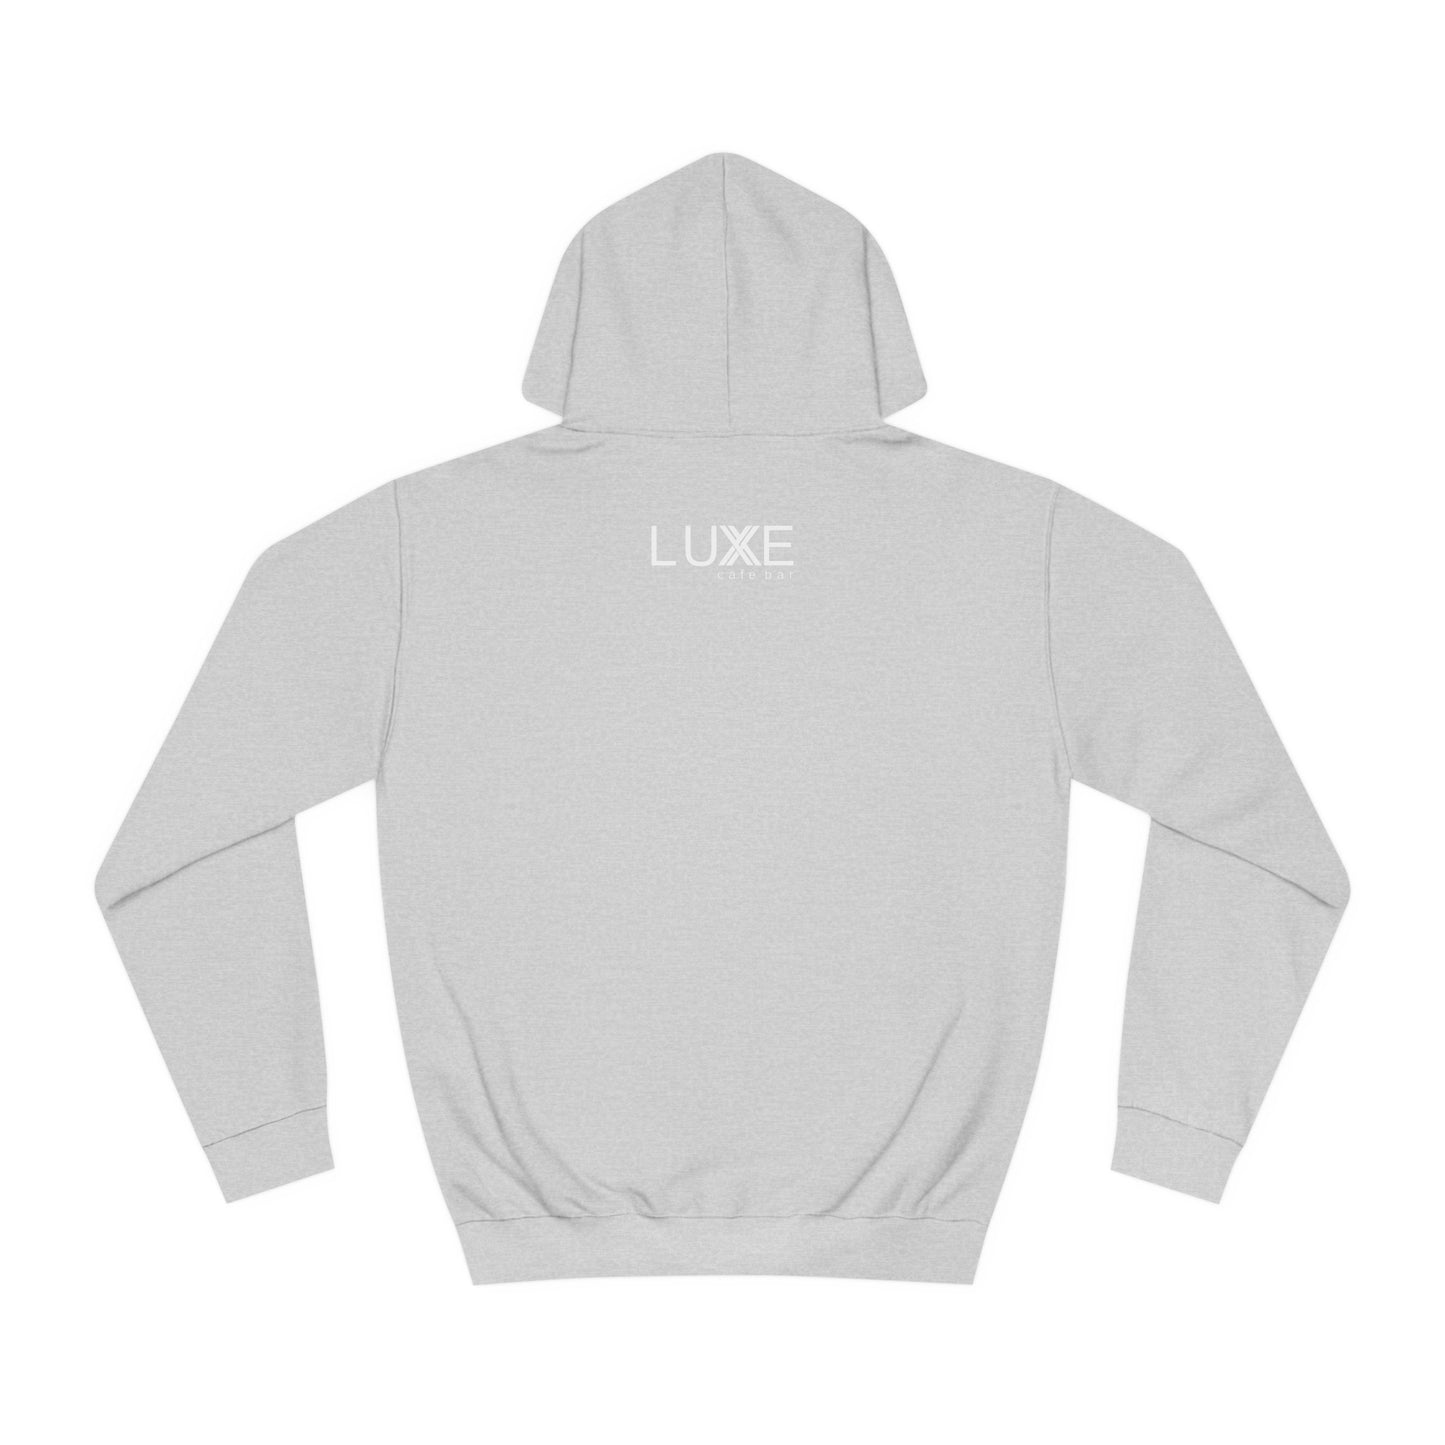 Does this come in Pink? Hoodie